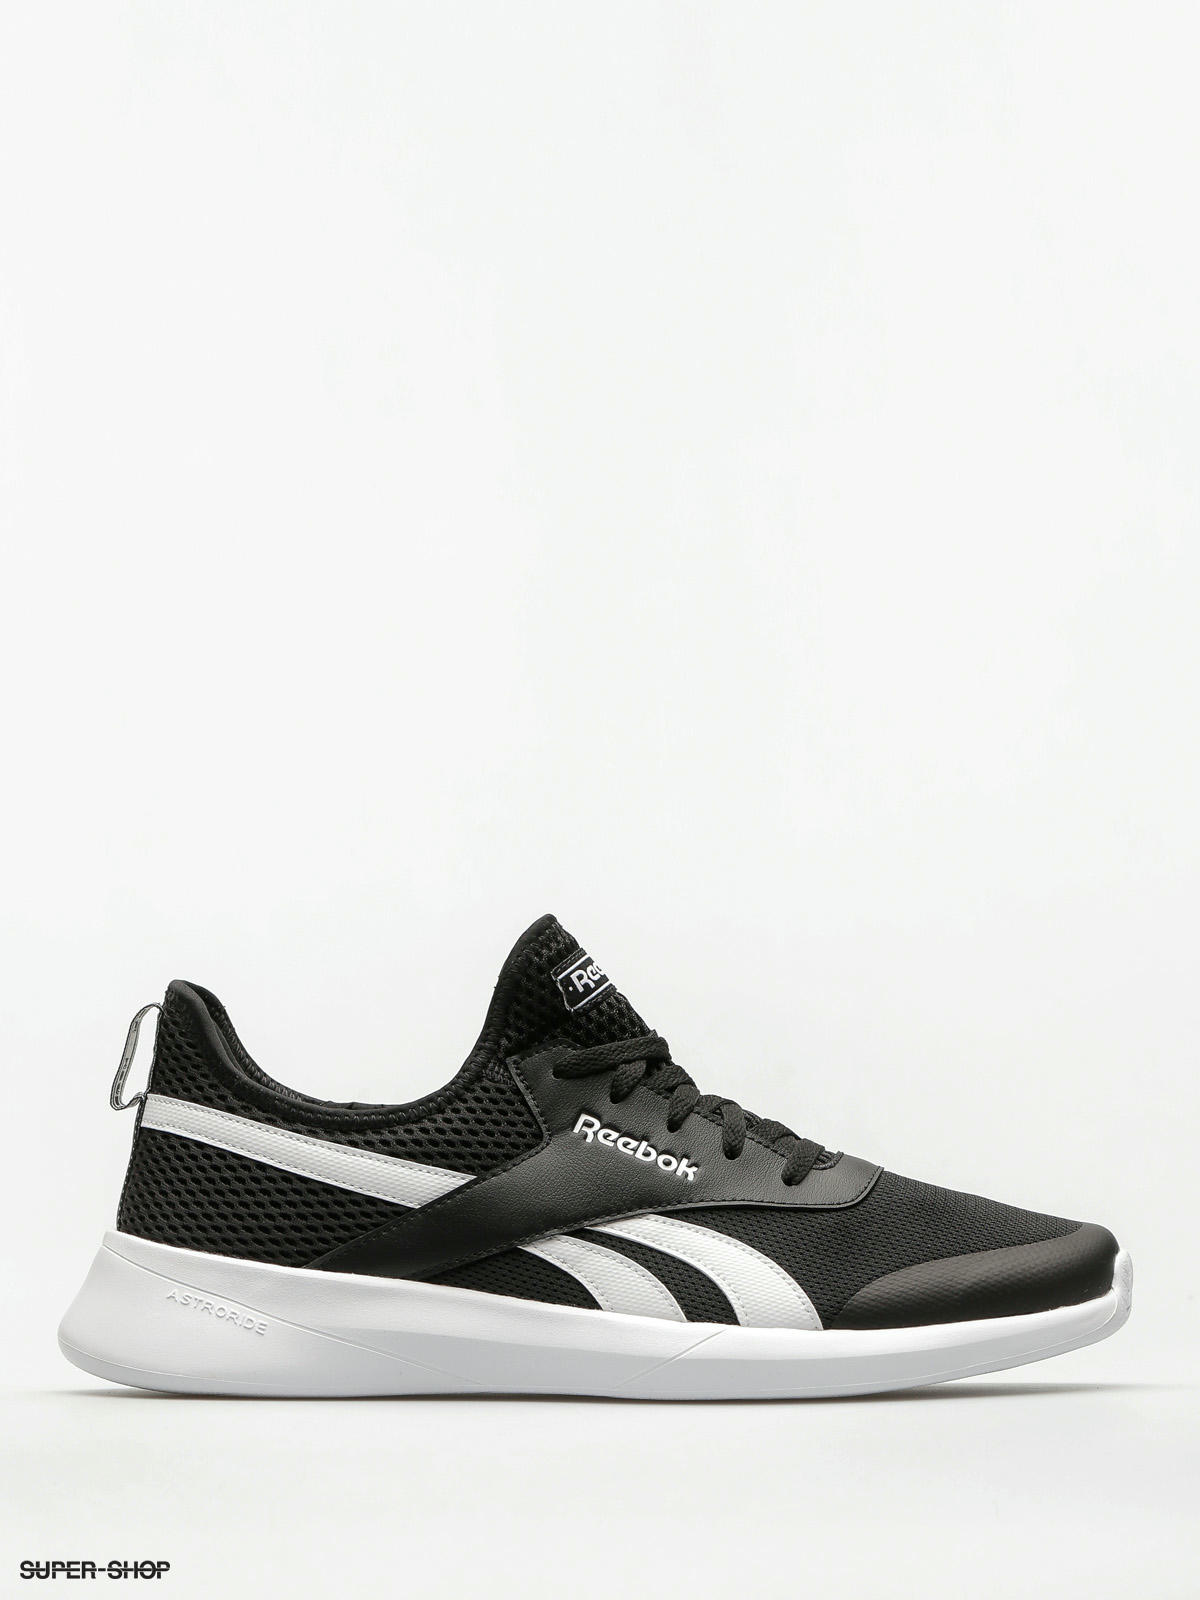 reebok shoes black and white